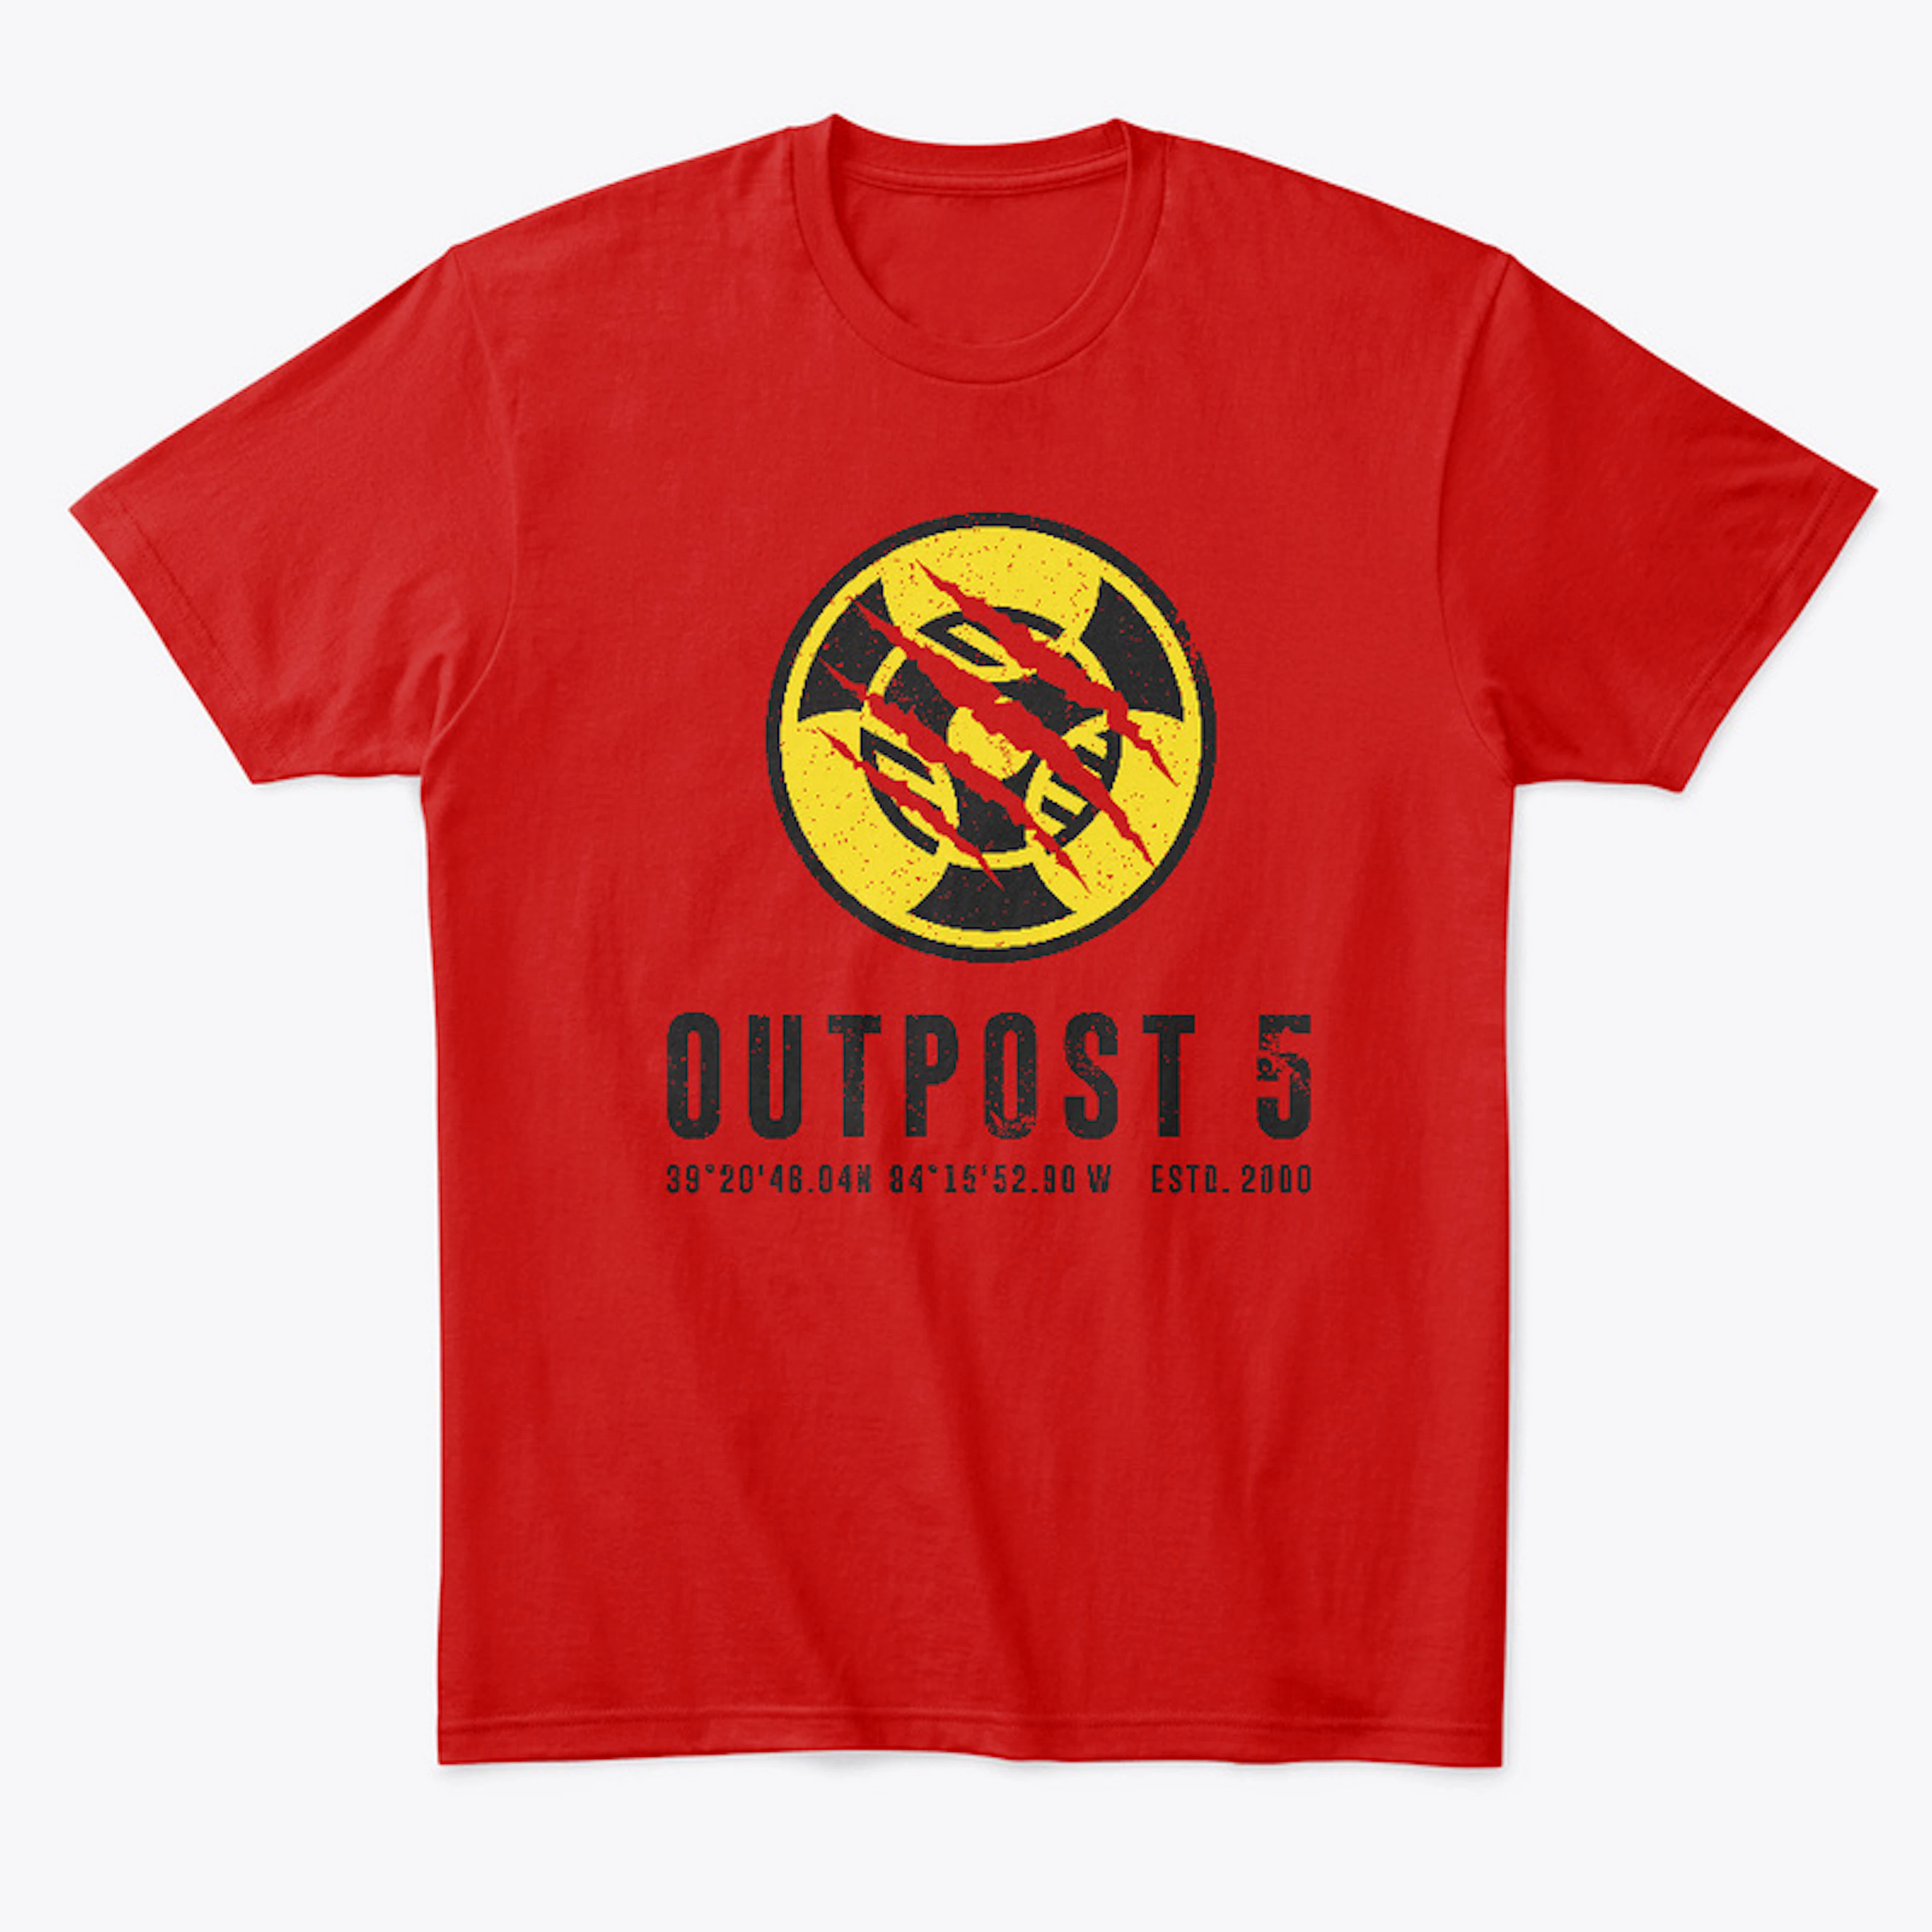 Outpost 5